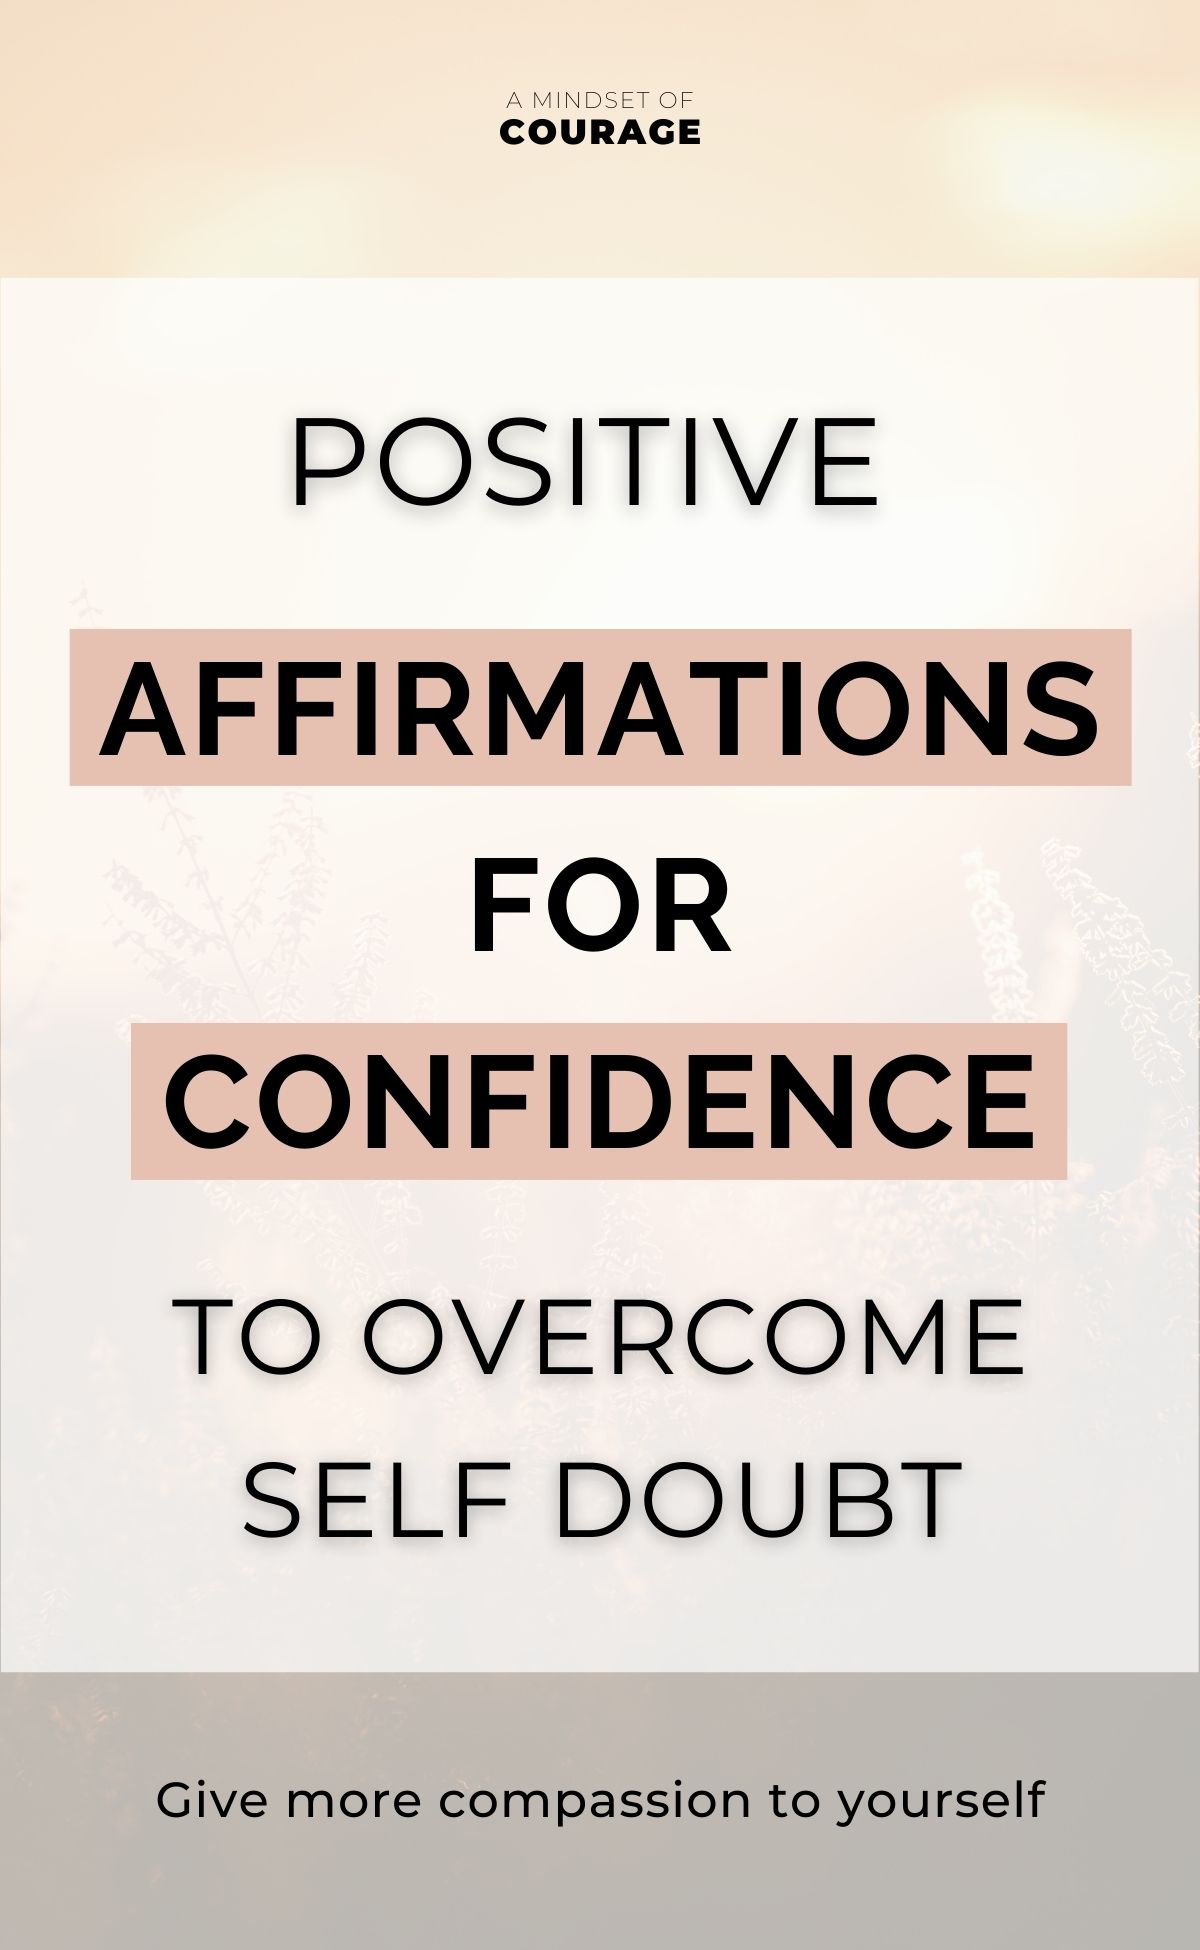 21 Positive Affirmations to Increase Confidence and Overcome Self Doubt